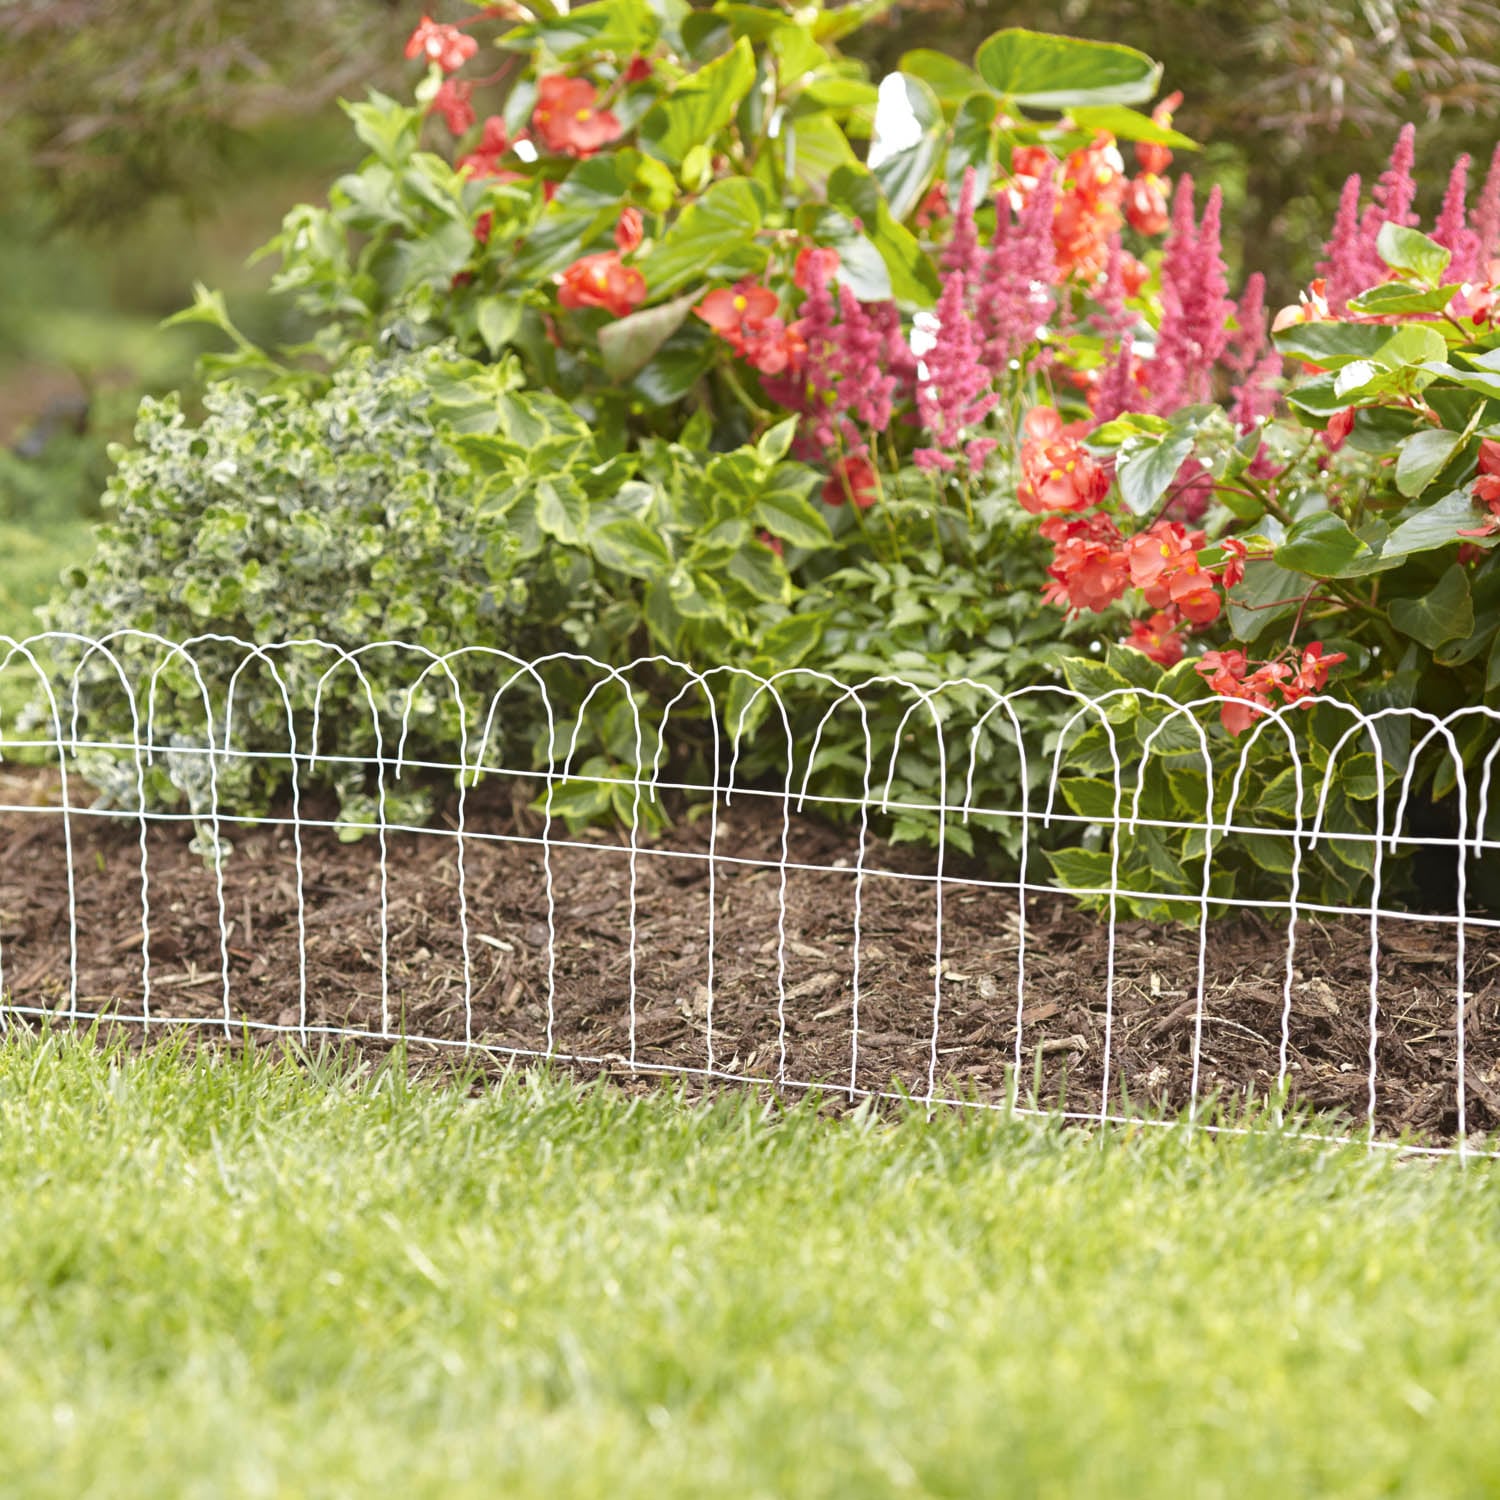 MTB Green Garden Border Edging Folding Fence Roll 14x20 Scroll Top Rolled Fencing Also Sold in Color Black 